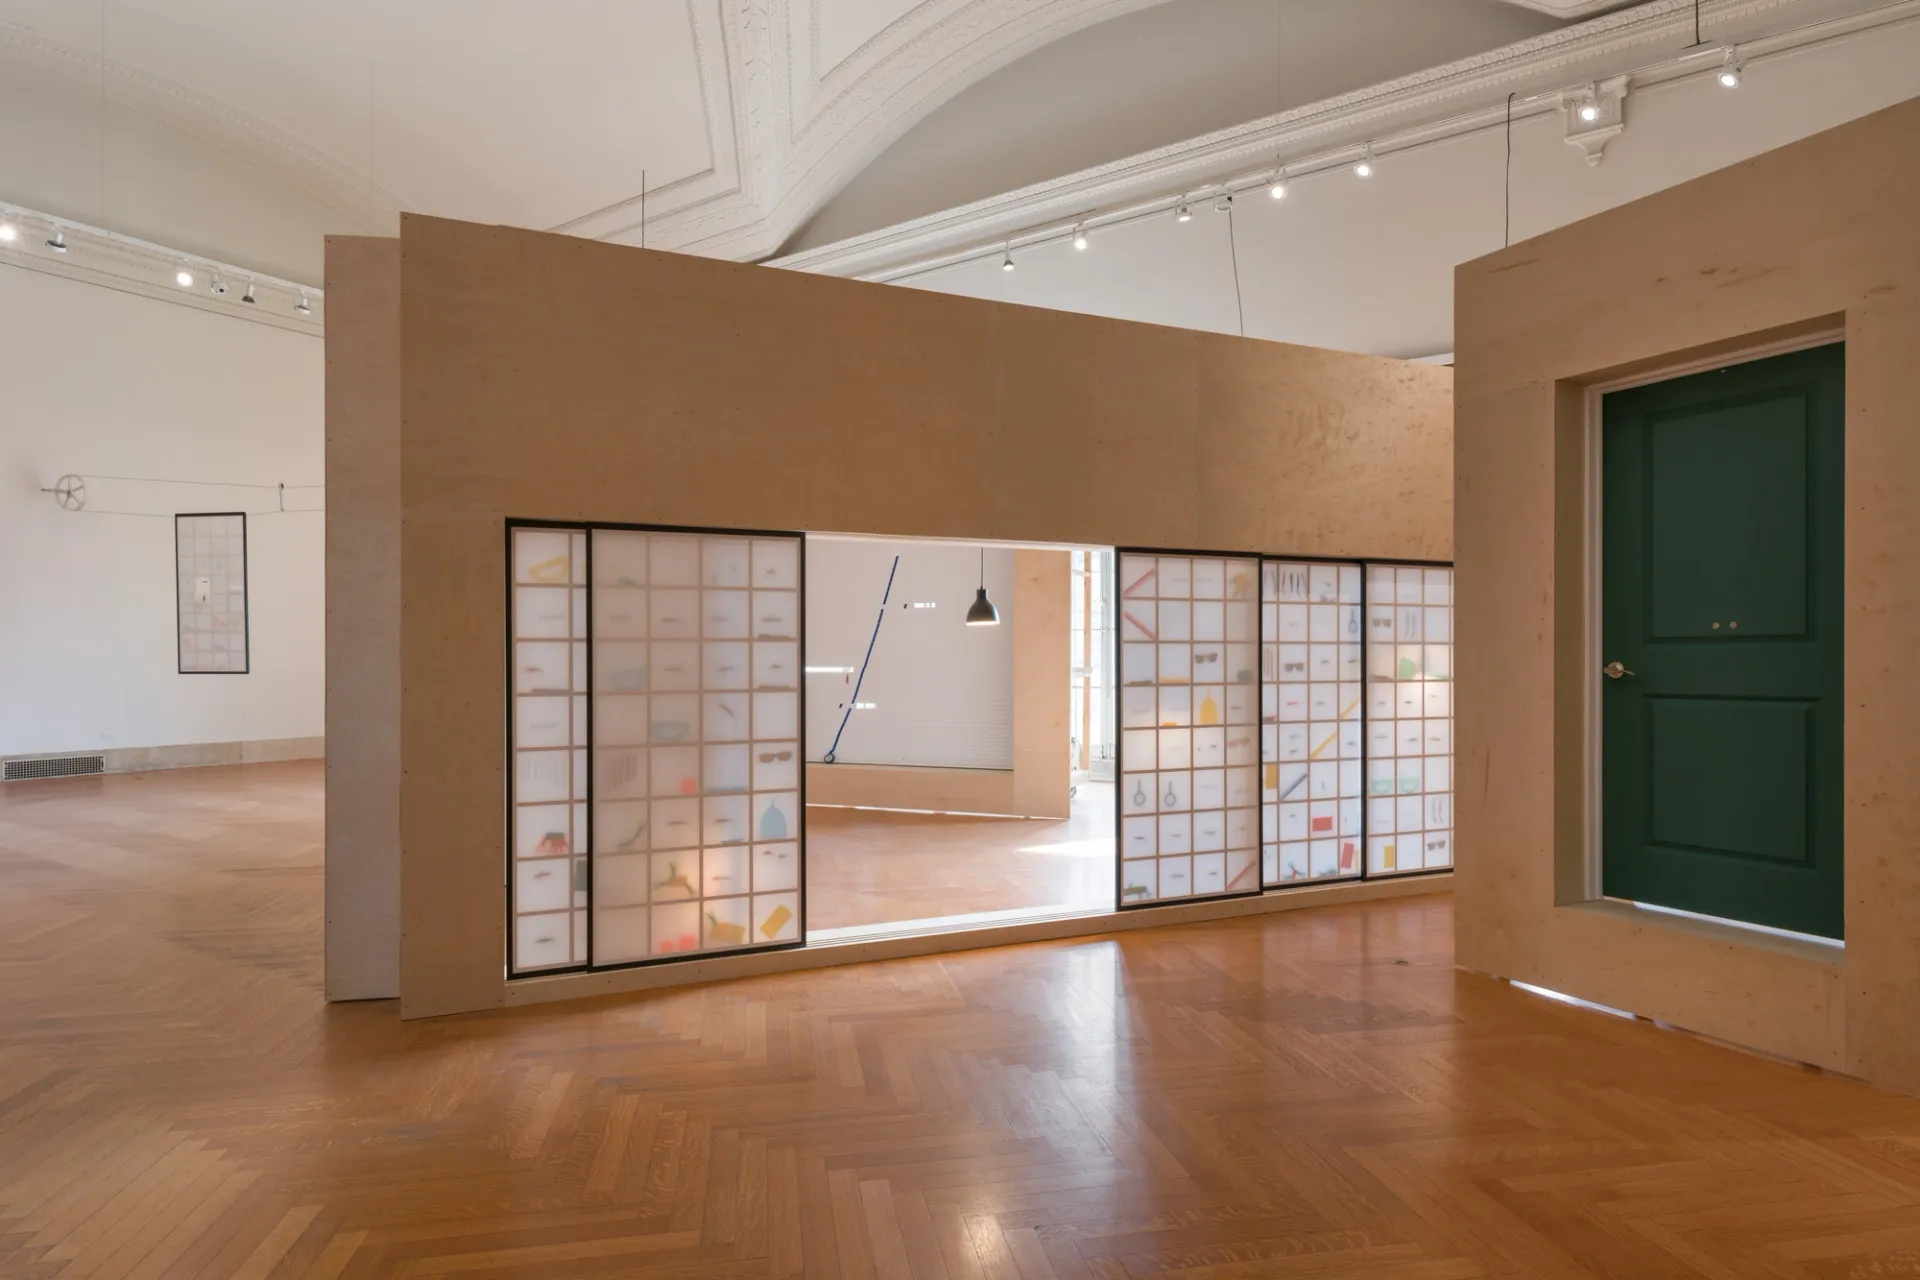 An art installation with a row of siding paper doors with objects and a gridded wooden frame visible inside. The doors are partially opened at different degrees in a wooden wall positioned at an angle. Adjacent to it is a green door situated within a wooden panel.